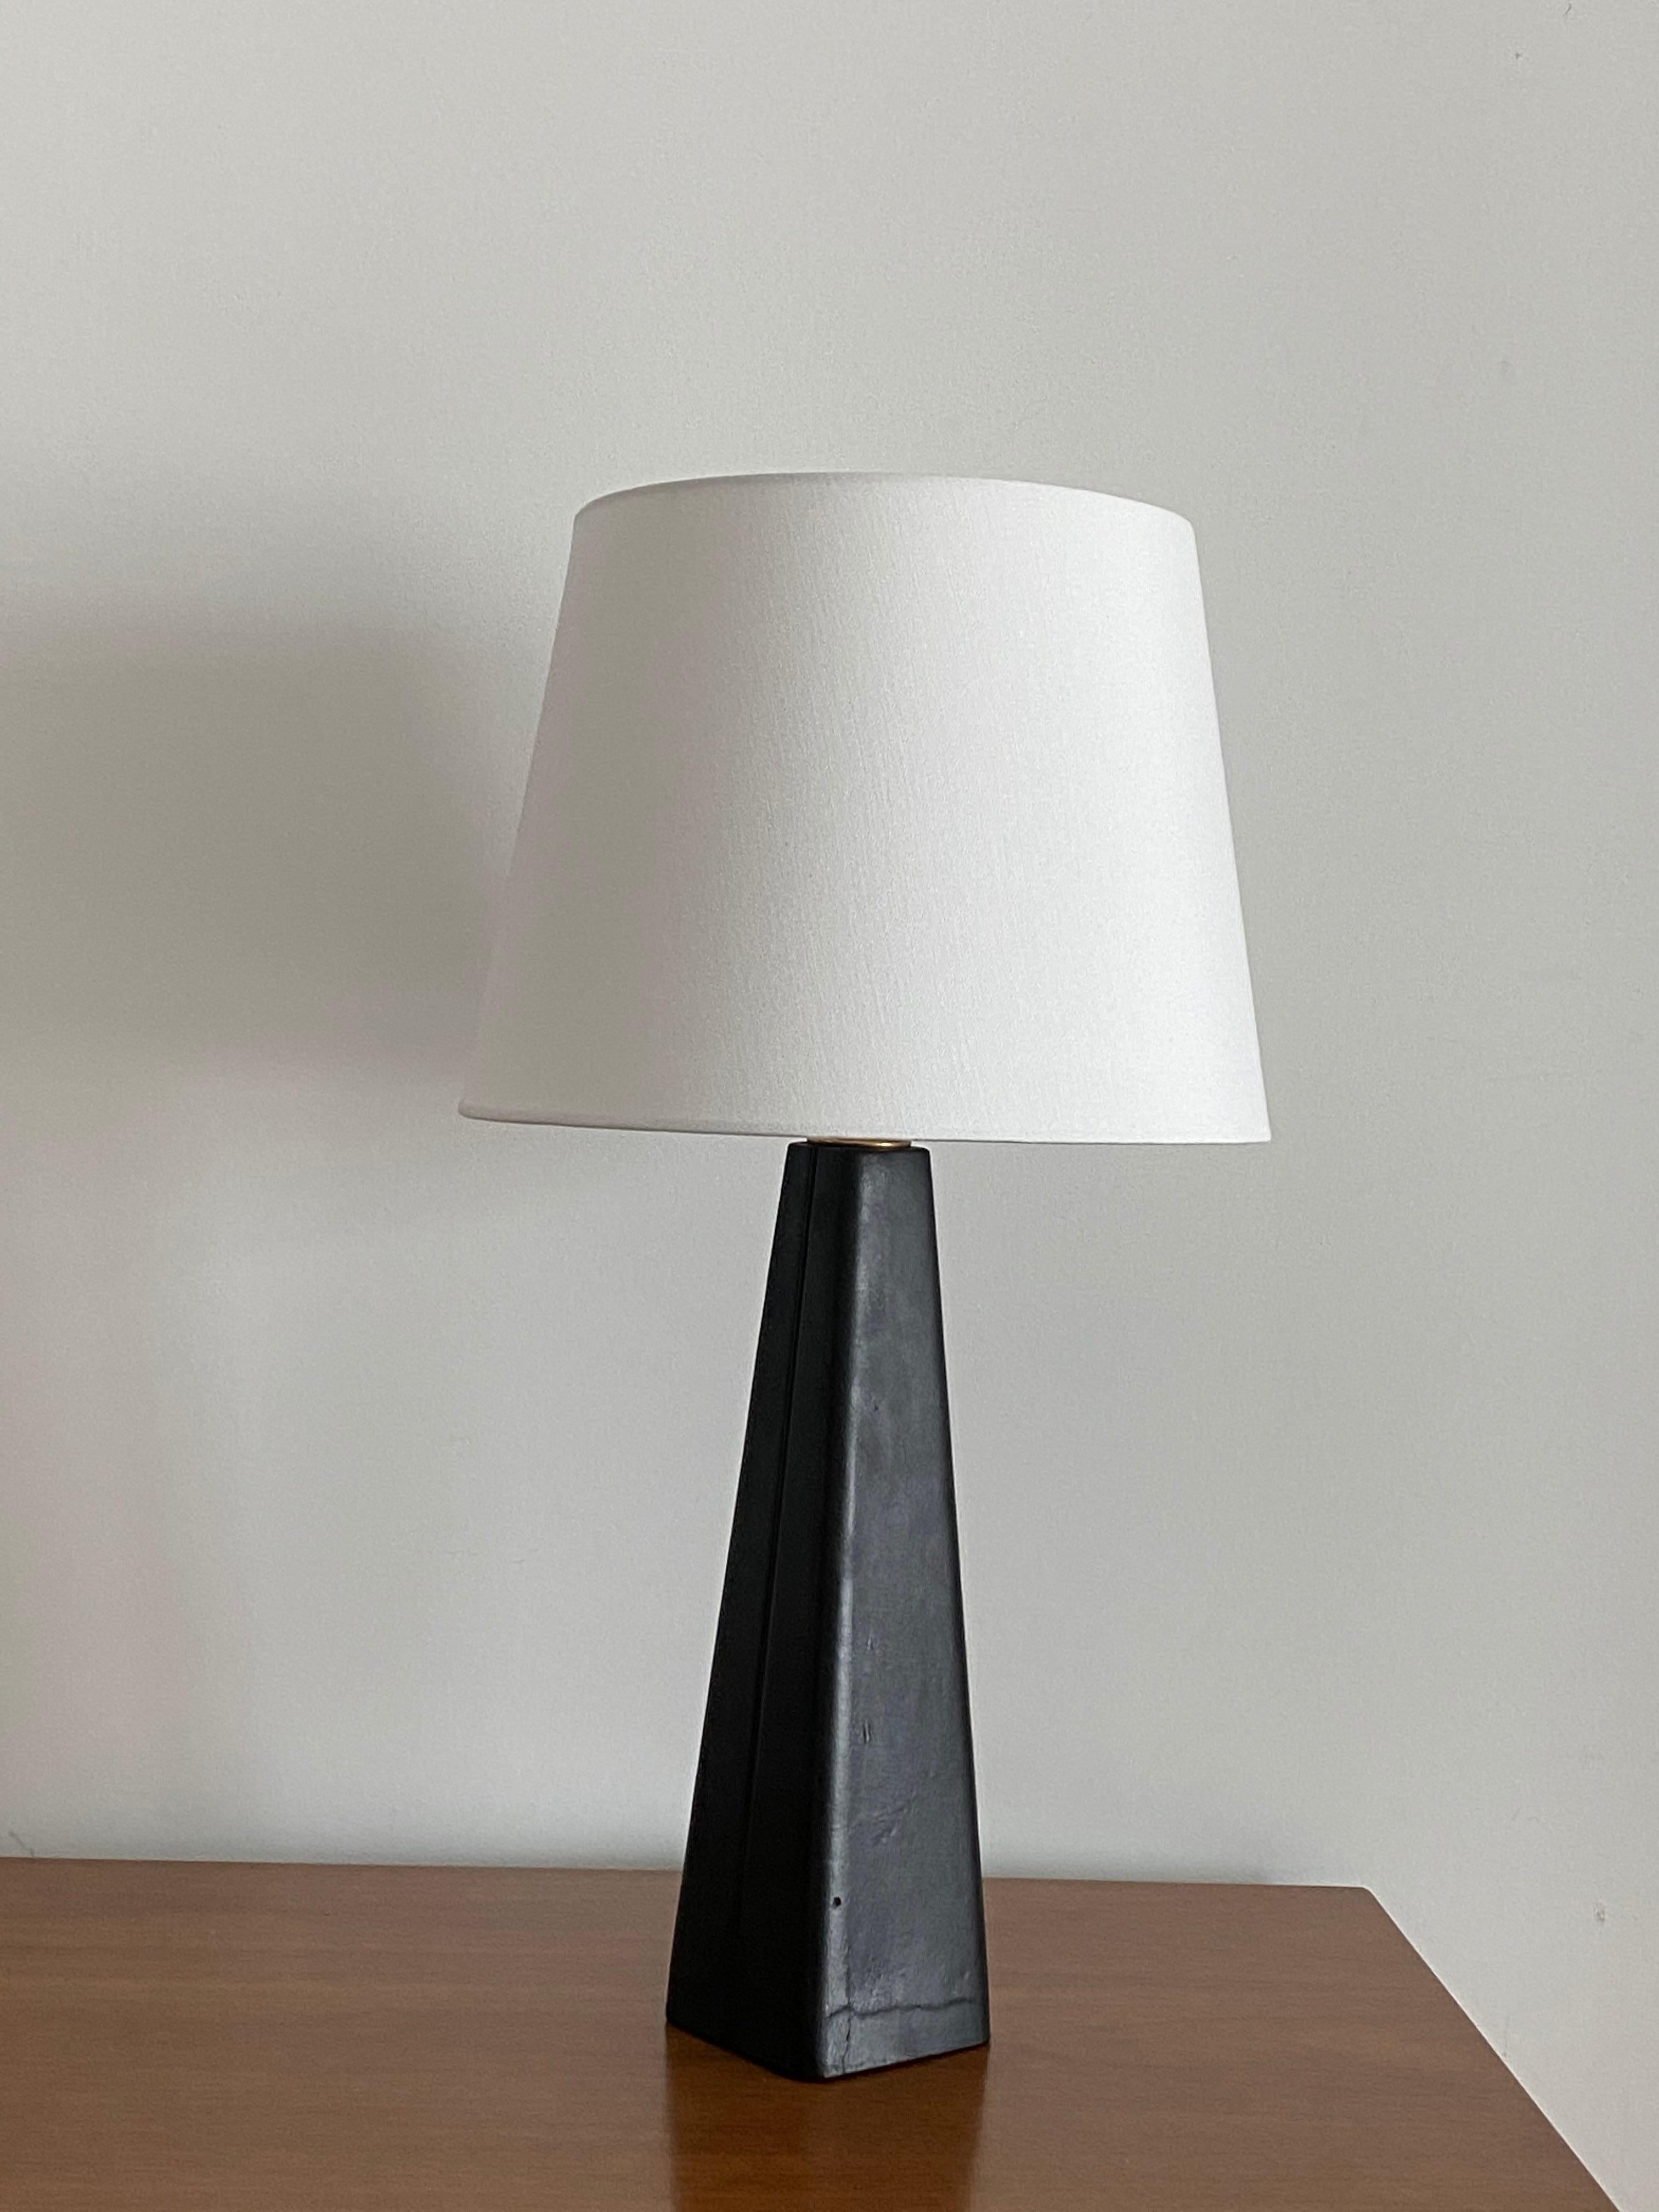 A table lamp designed by Lisa Johansson-Pape. Produced by Ornö, Finland in the 1960s. 

Made of a solid block of wood covered in leather, fitted with a brass neck. Lampshade attached for illustration. Sold without lampshade. Measured without